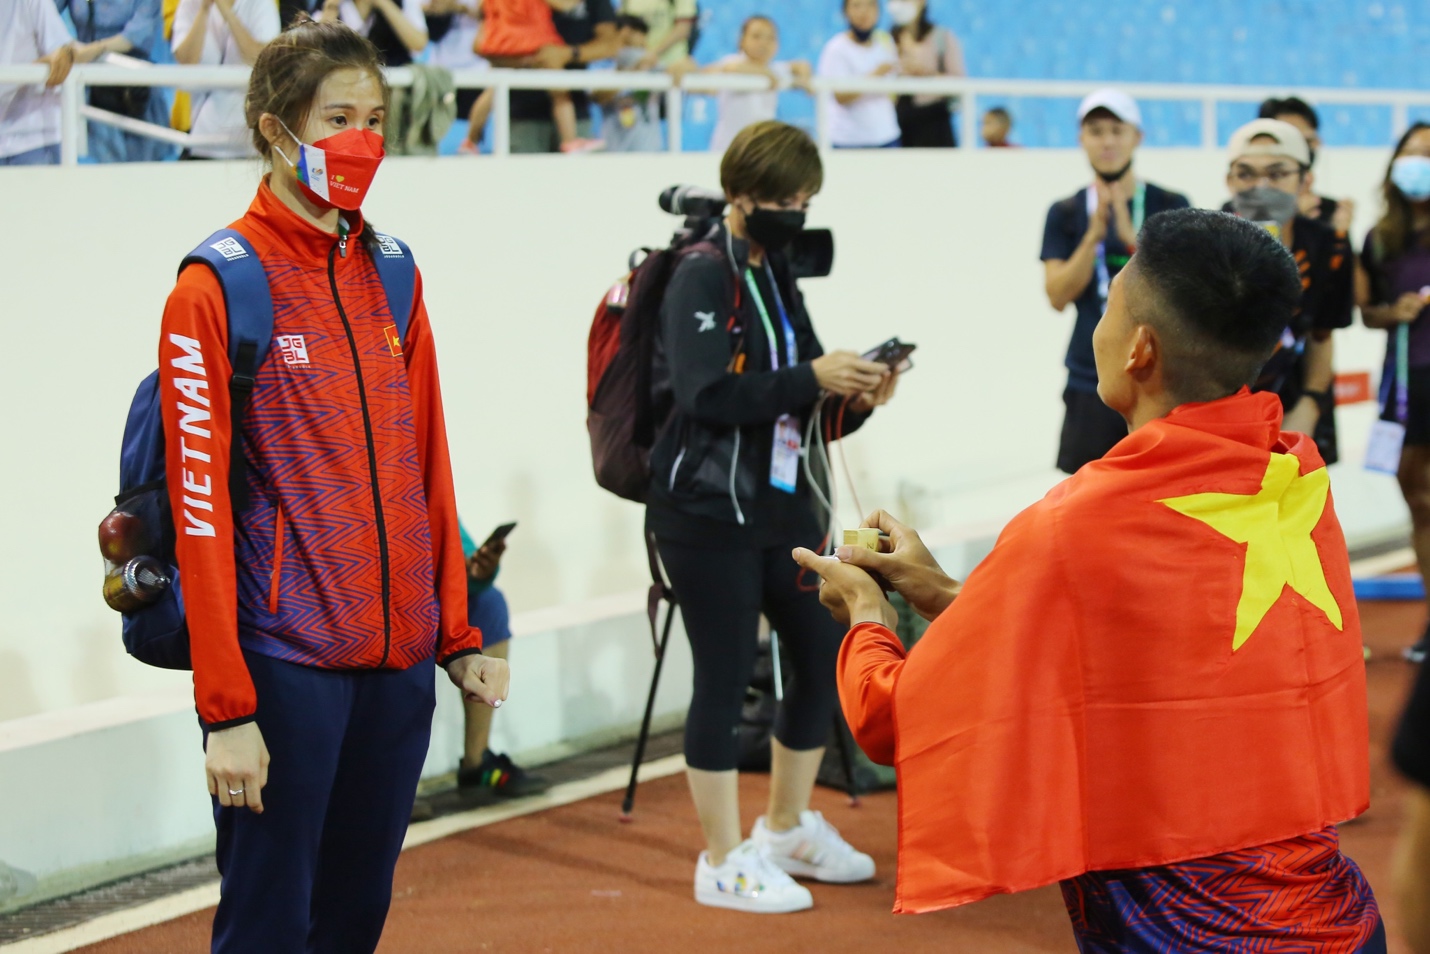 Beautiful love story at SEA Games 31: Having just won the gold, the athlete proposed to the girlfriend of the rattan player - Photo 1.